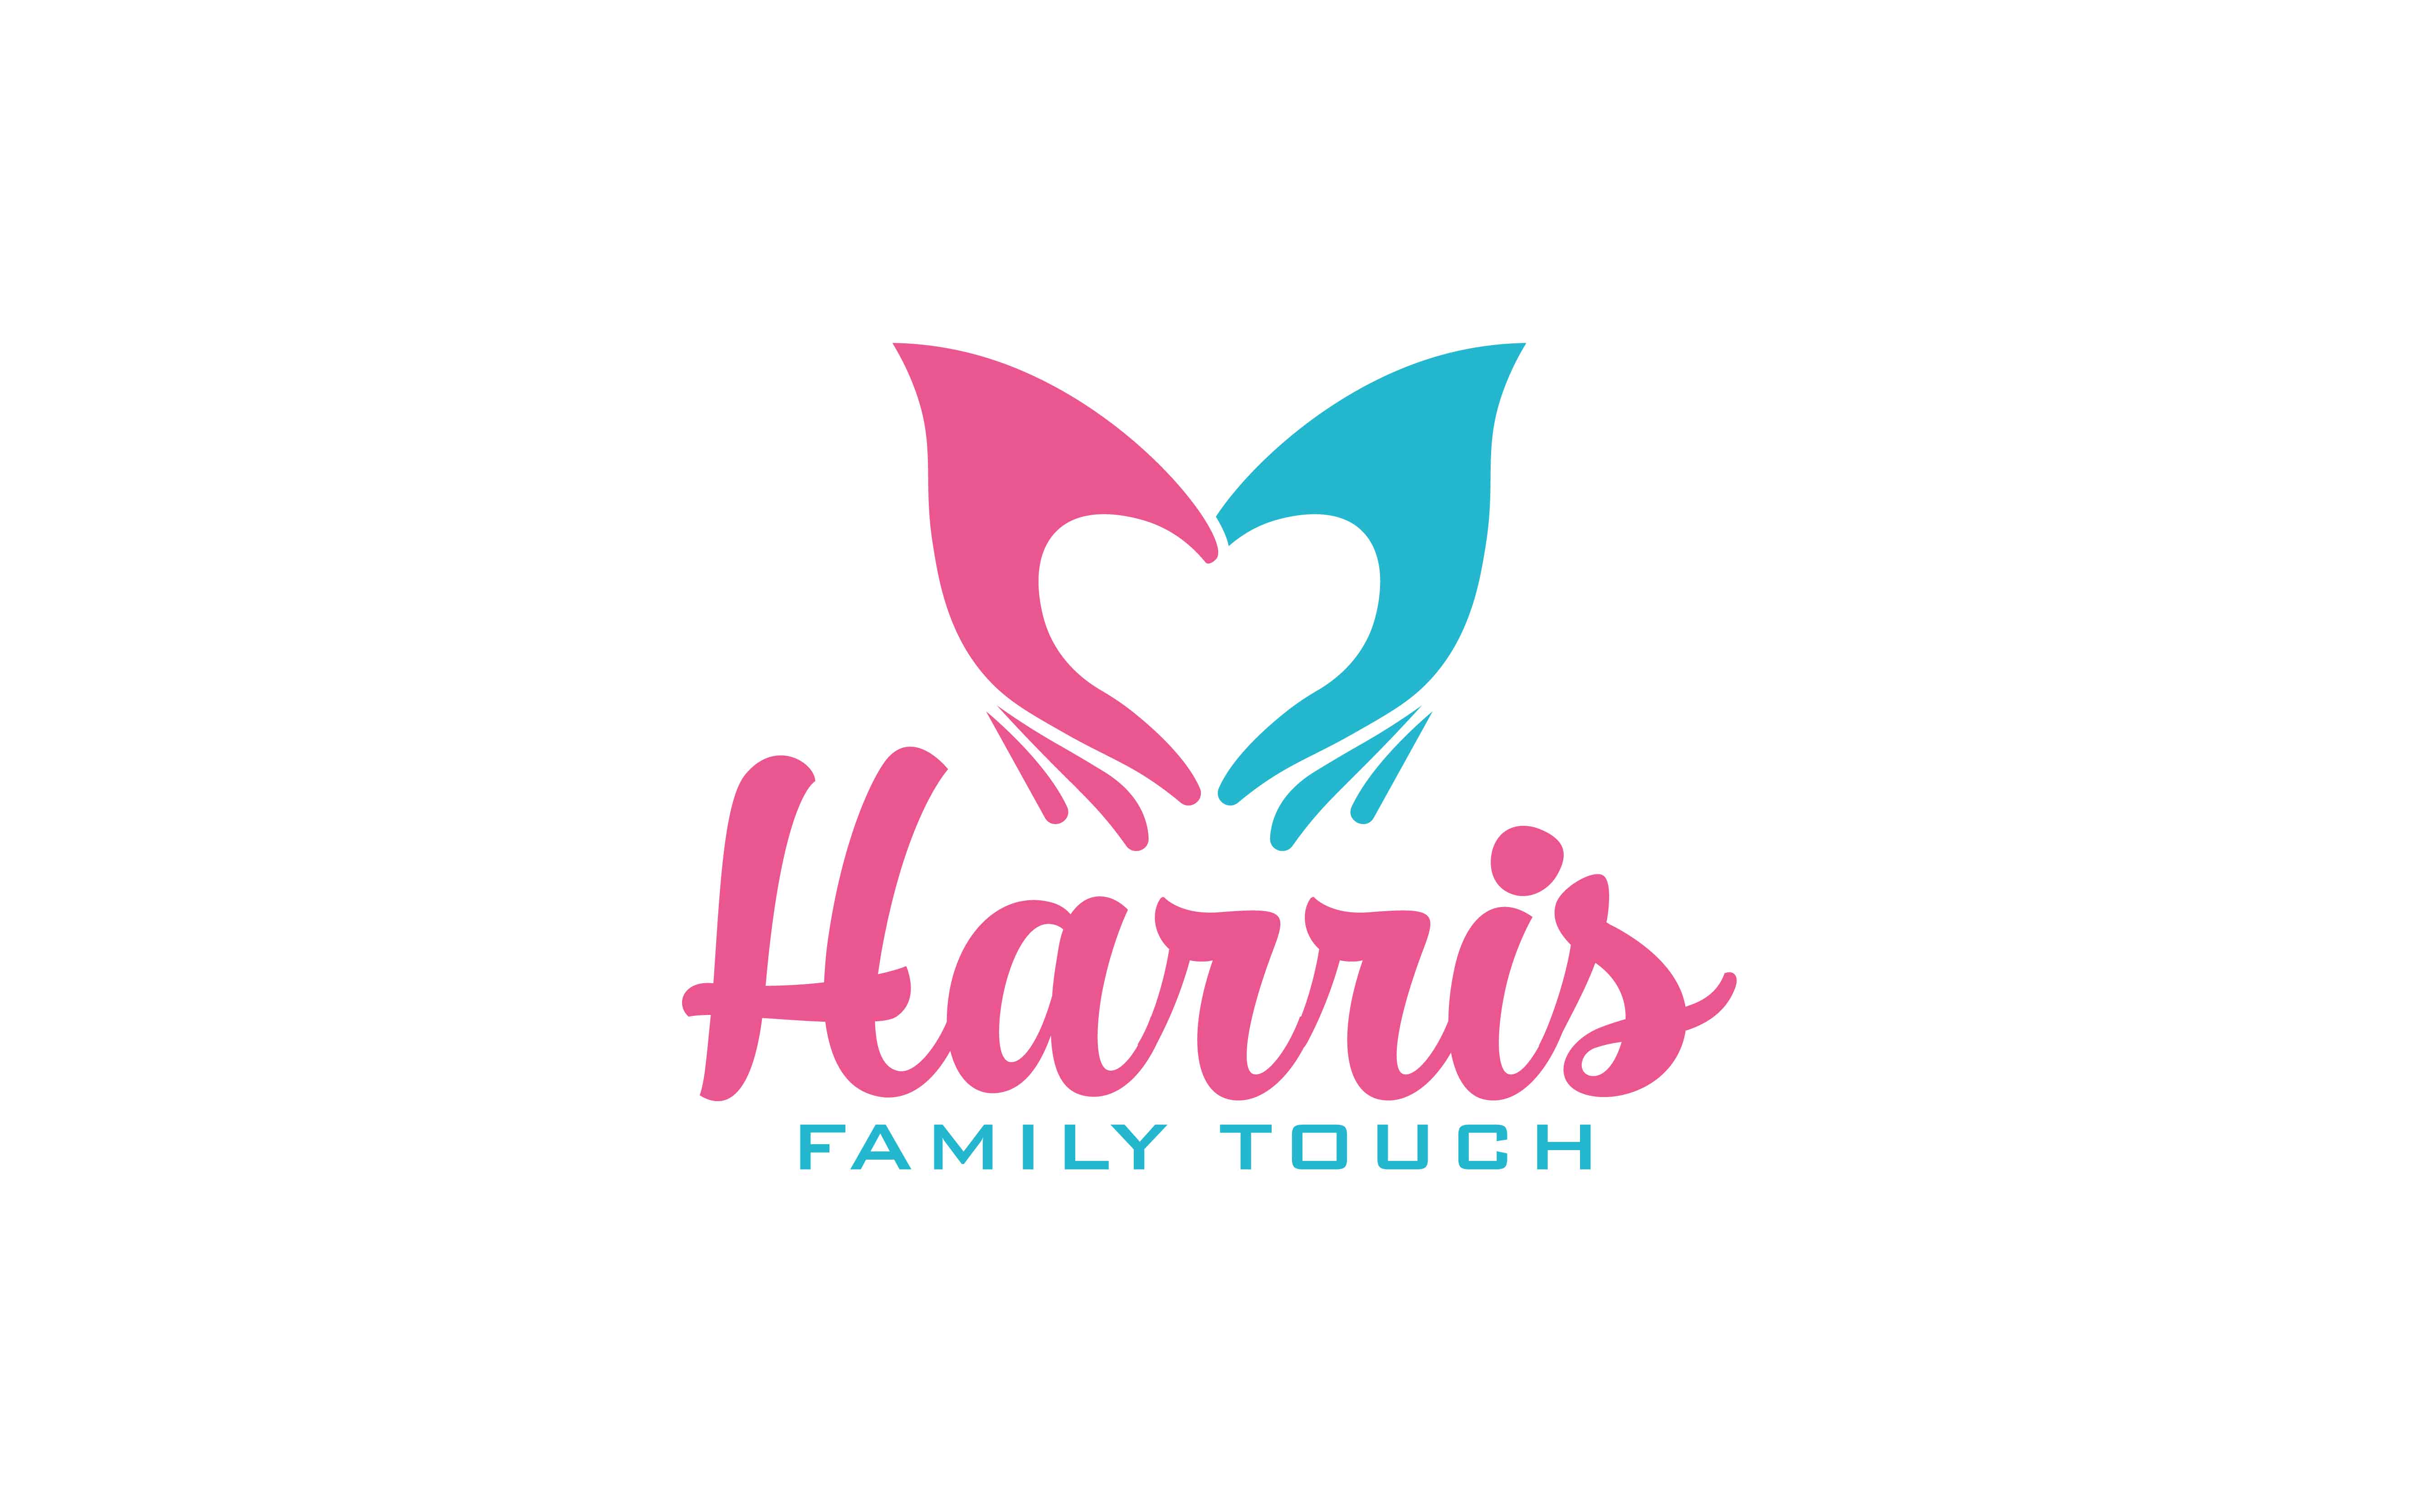 Harris Family Touch